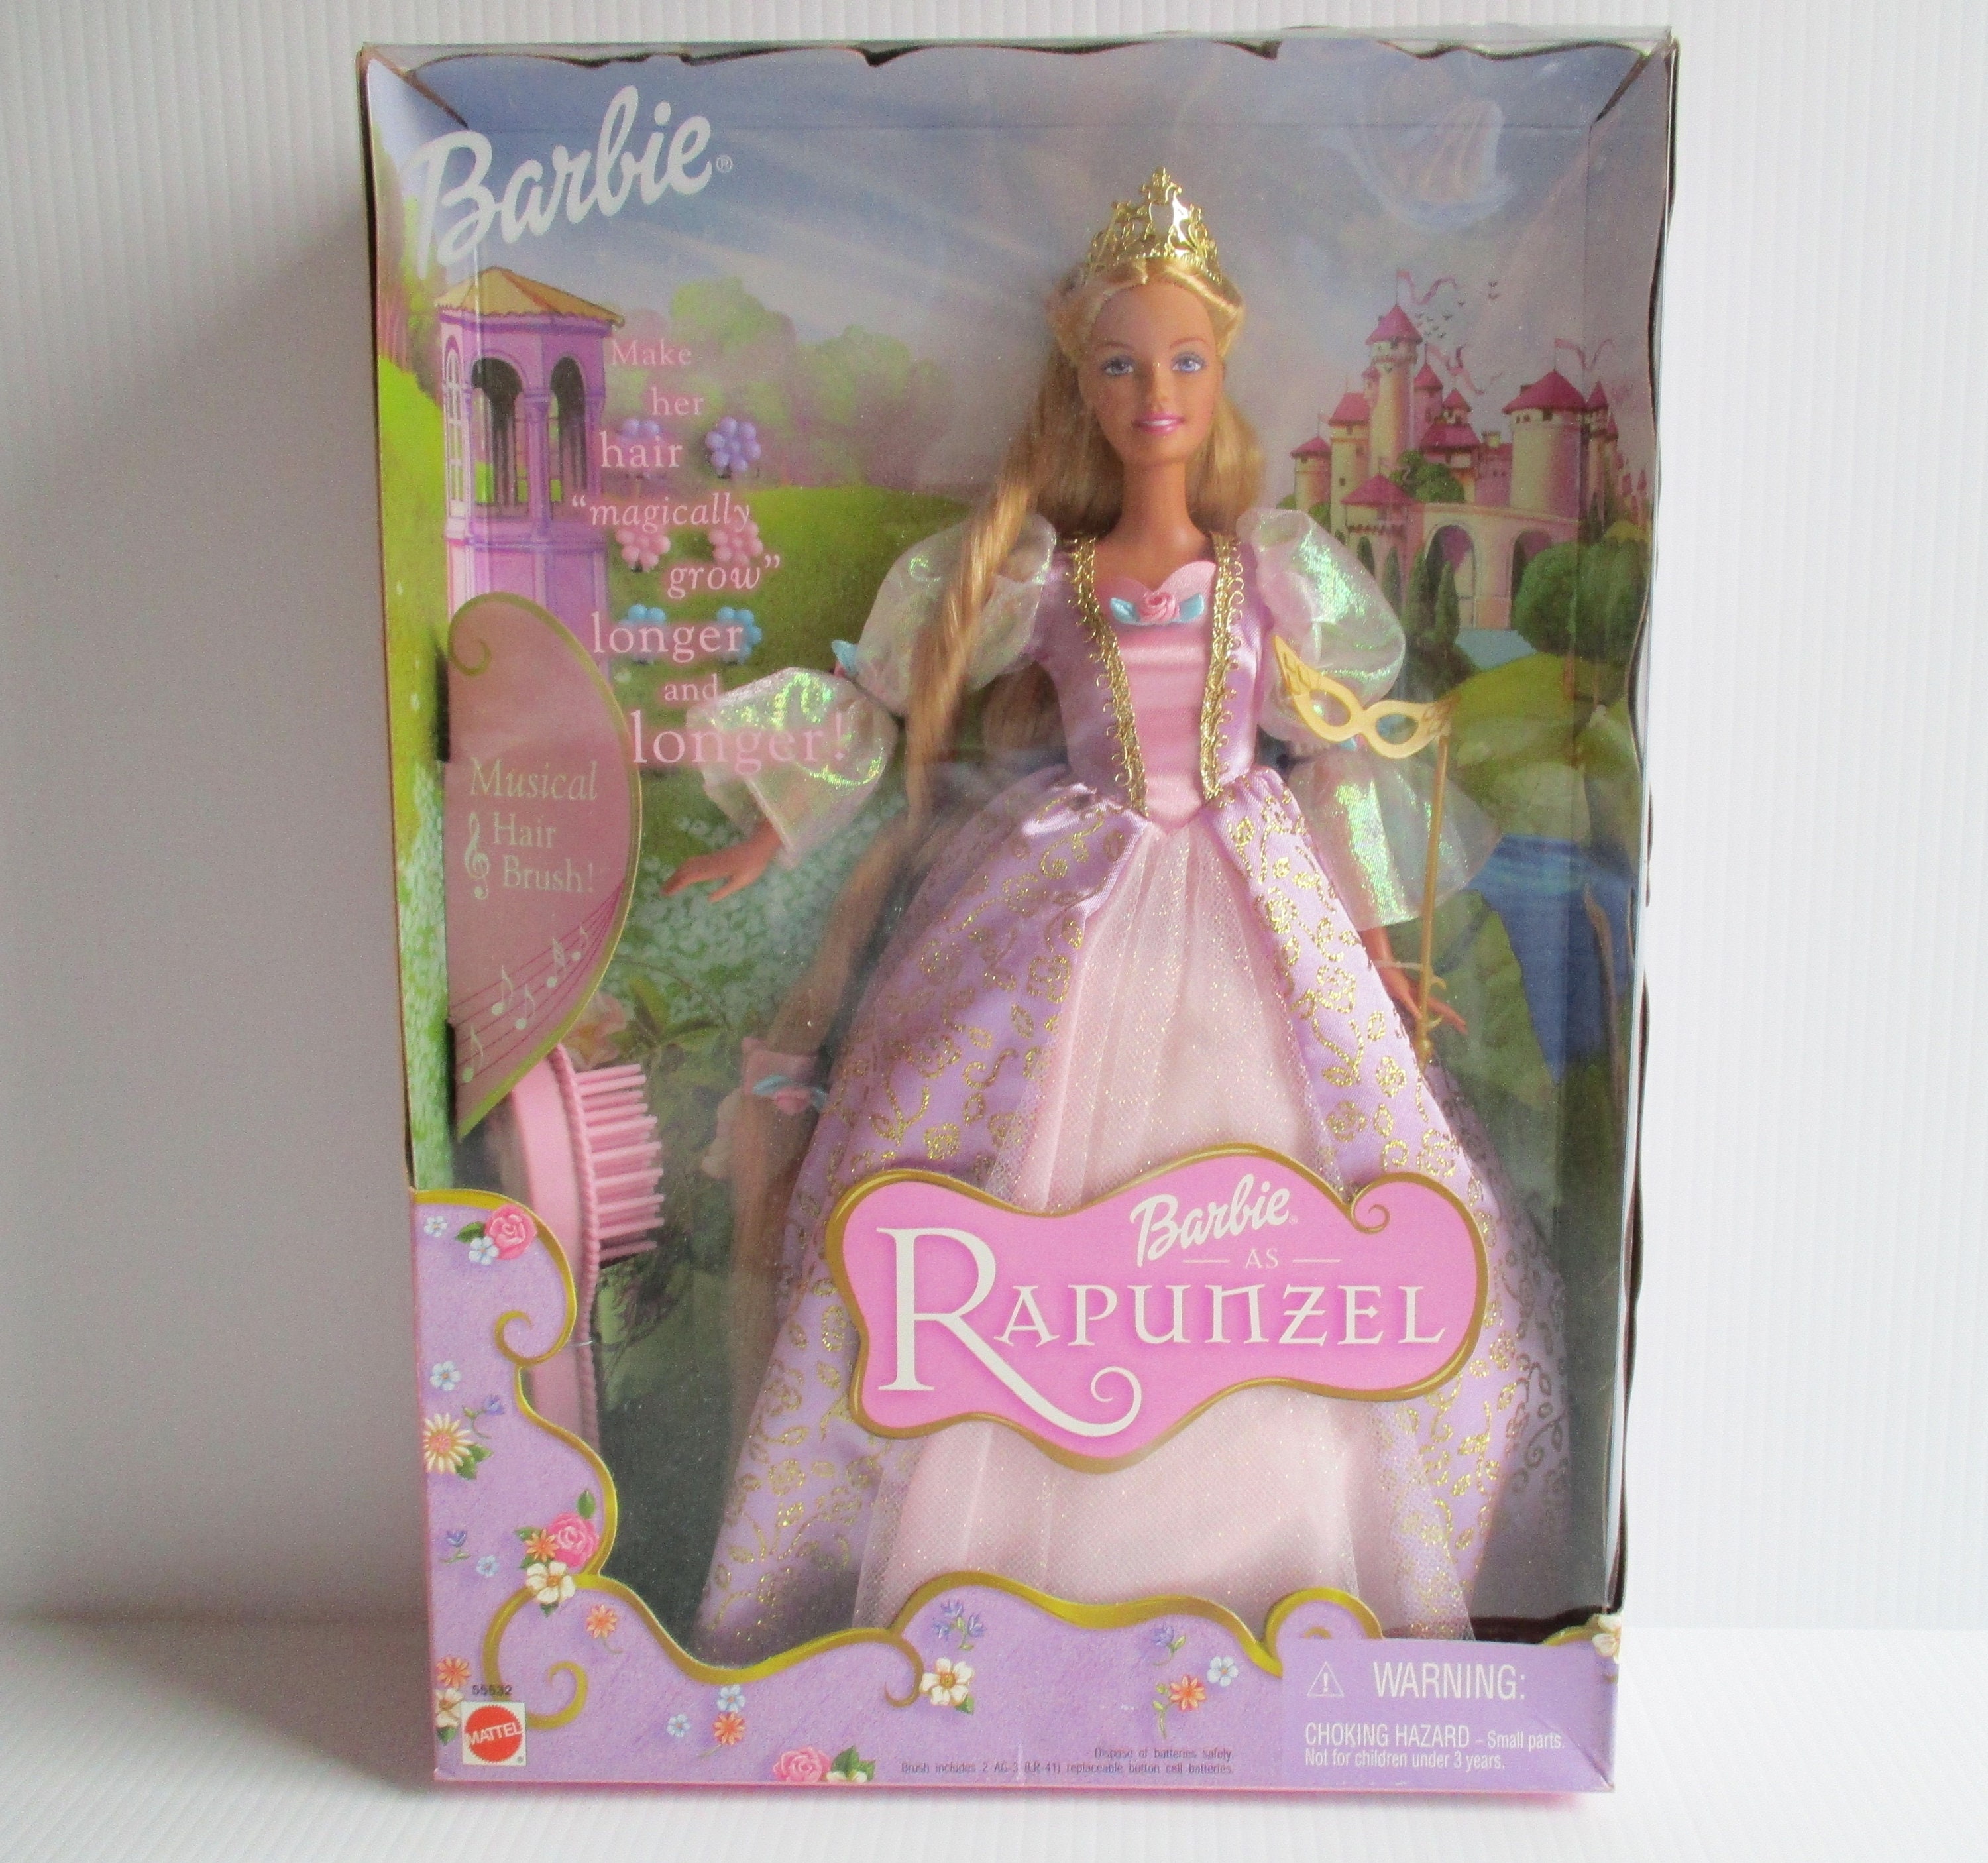 Vintage 2001 Barbie Rapunzel With Musical Hairbrush in Etsy